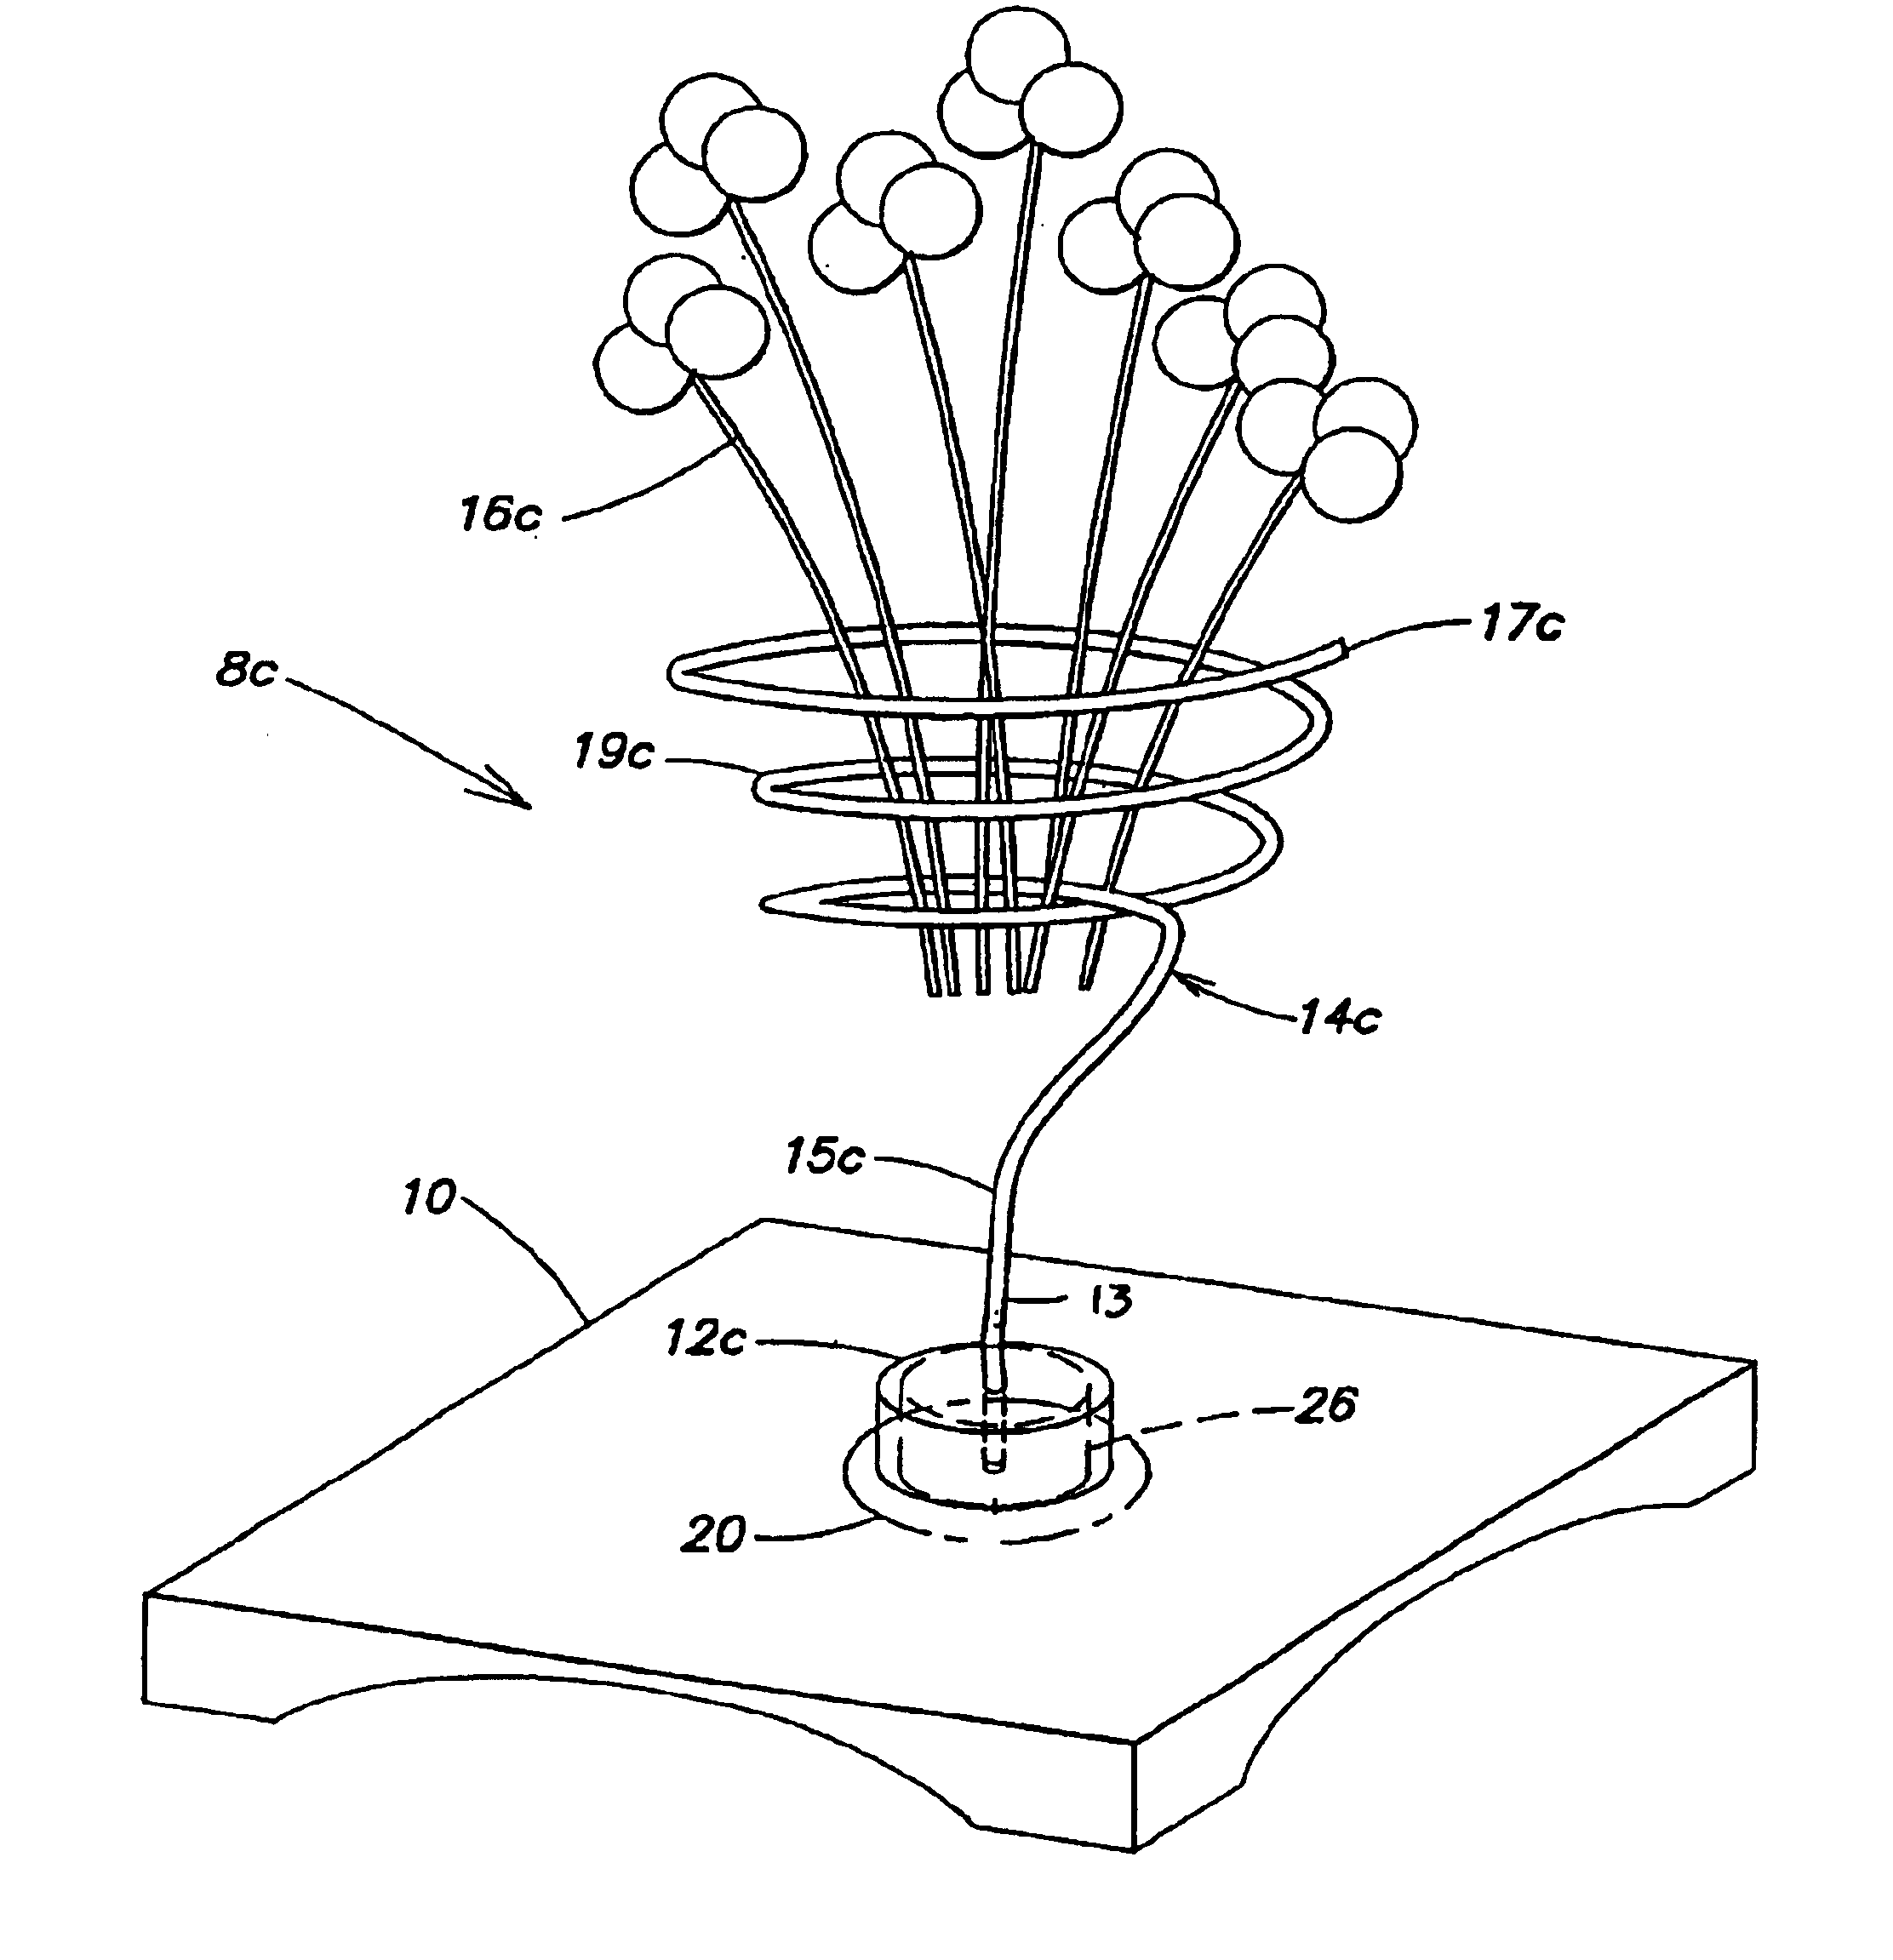 Apparatus for displaying culinary, horticultural or floral items